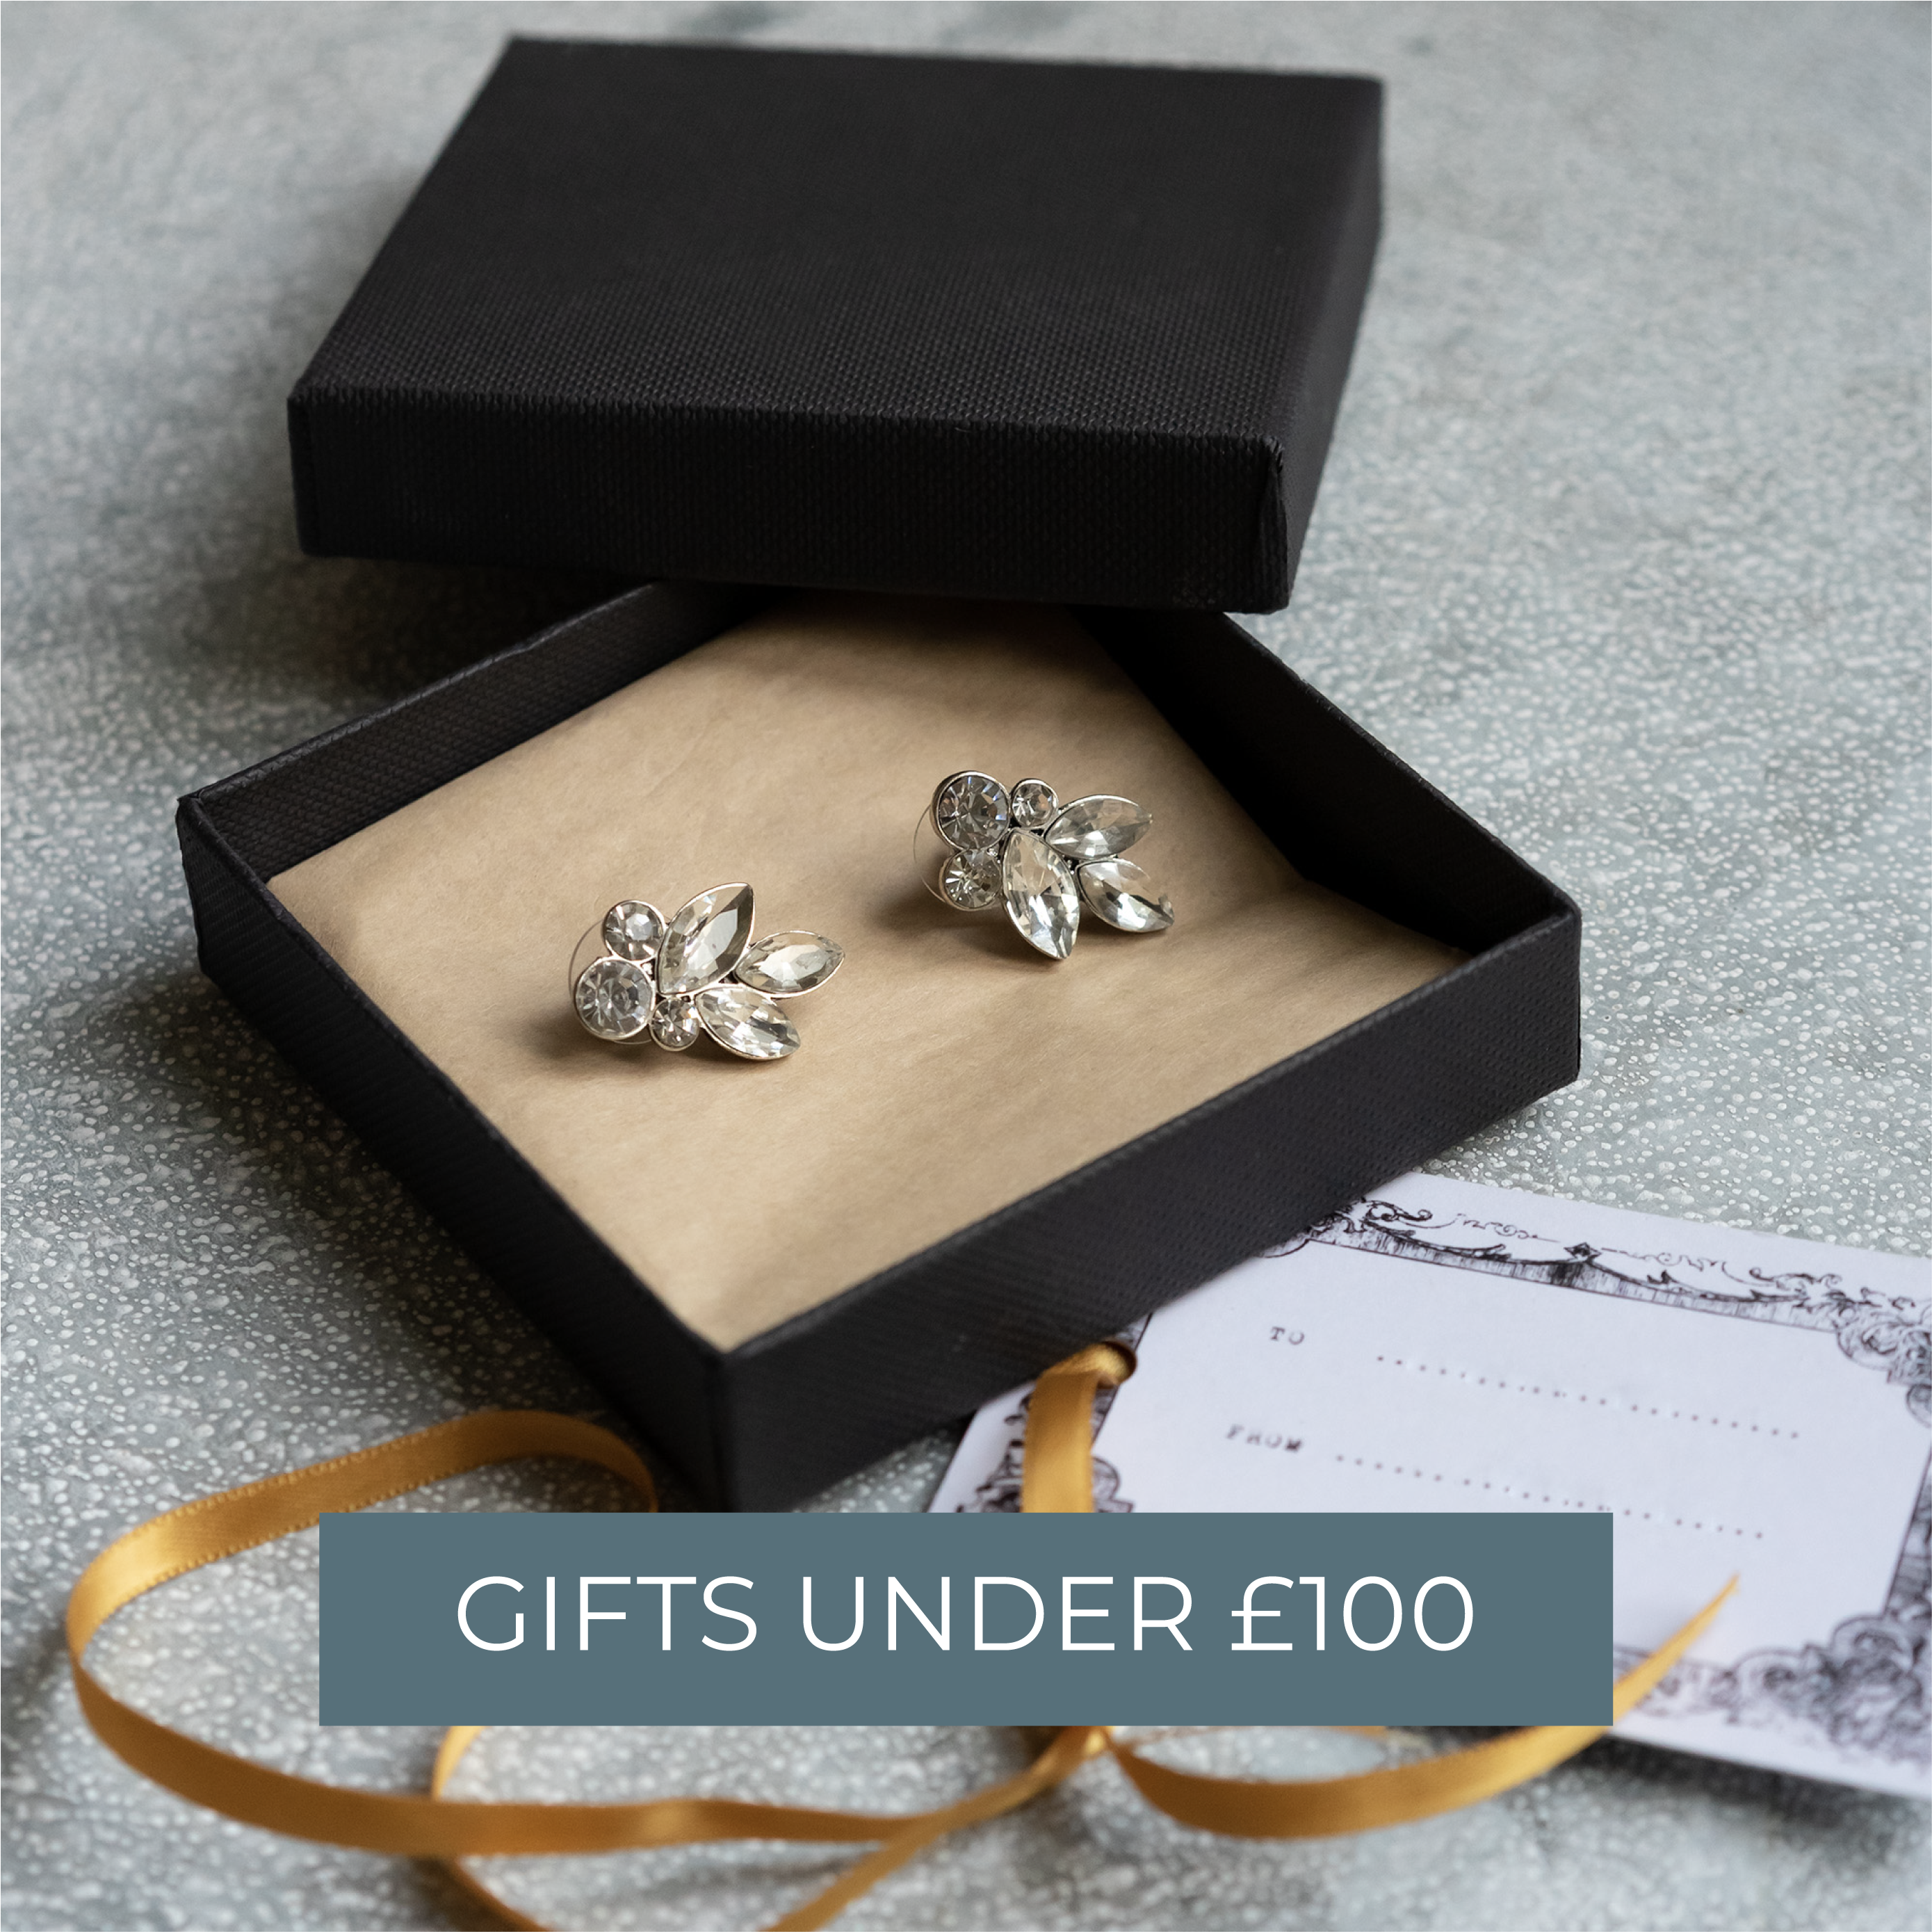 A pair of crystal earrings in a black gift box